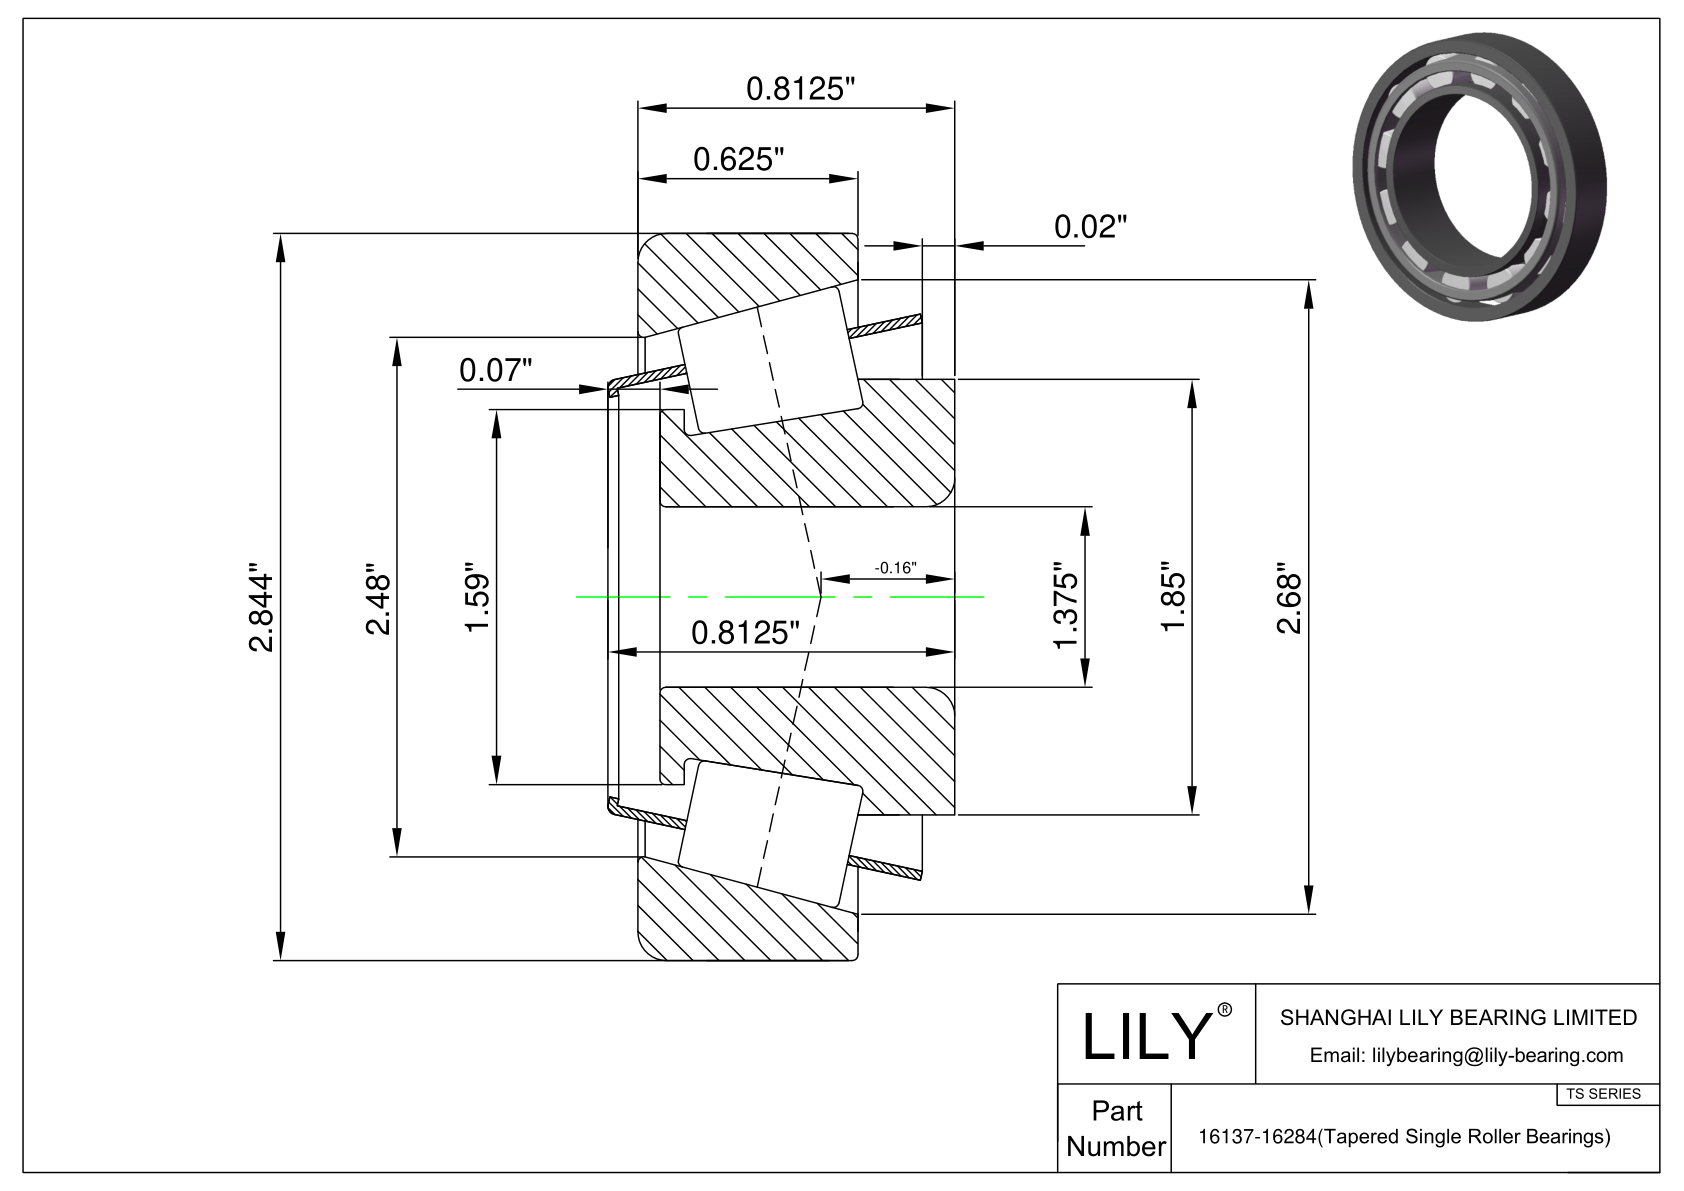 16137-16284 TS (Tapered Single Roller Bearings) (Imperial) cad drawing